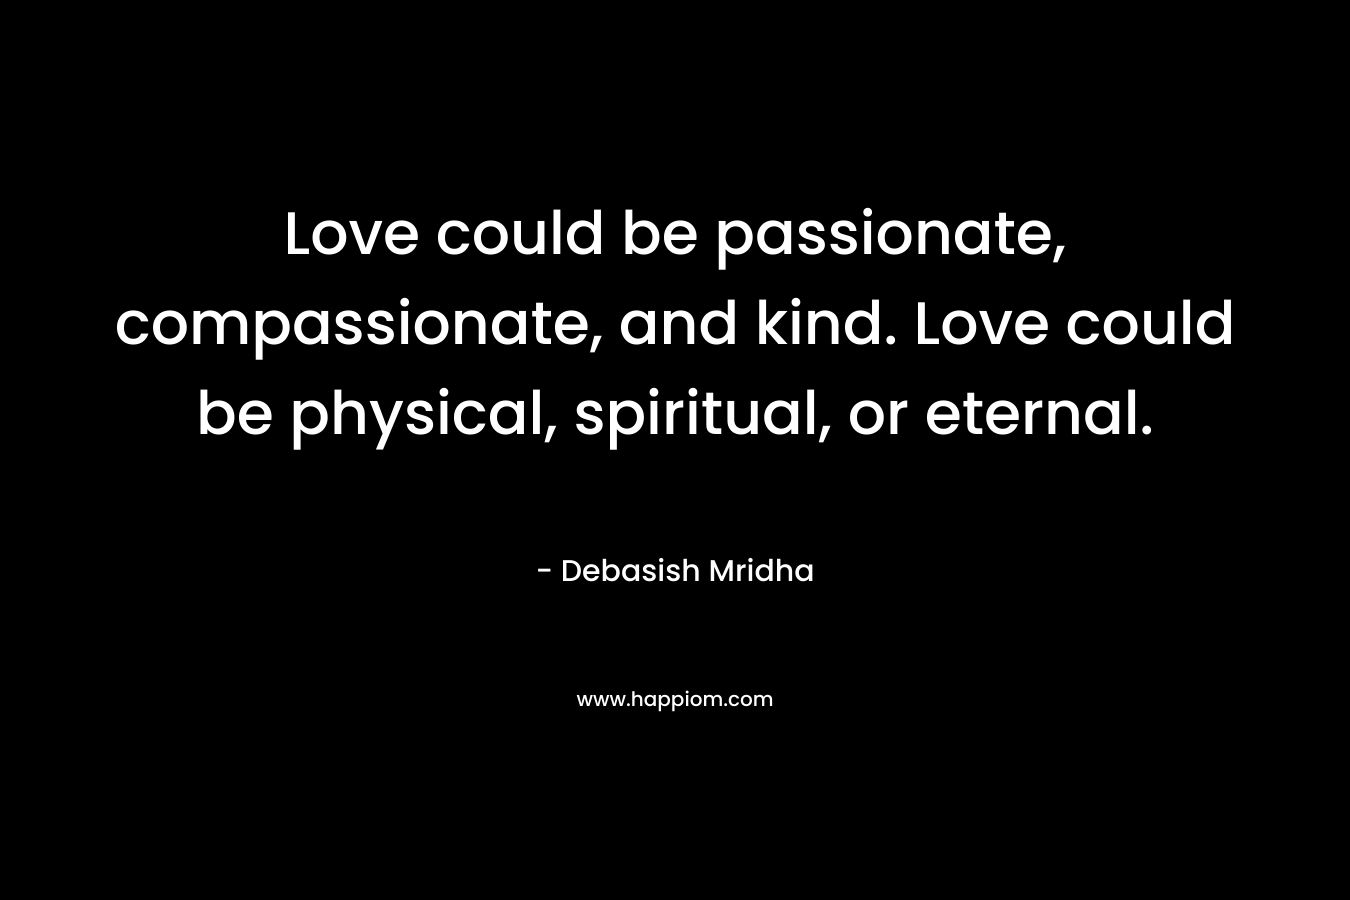 Love could be passionate, compassionate, and kind. Love could be physical, spiritual, or eternal.